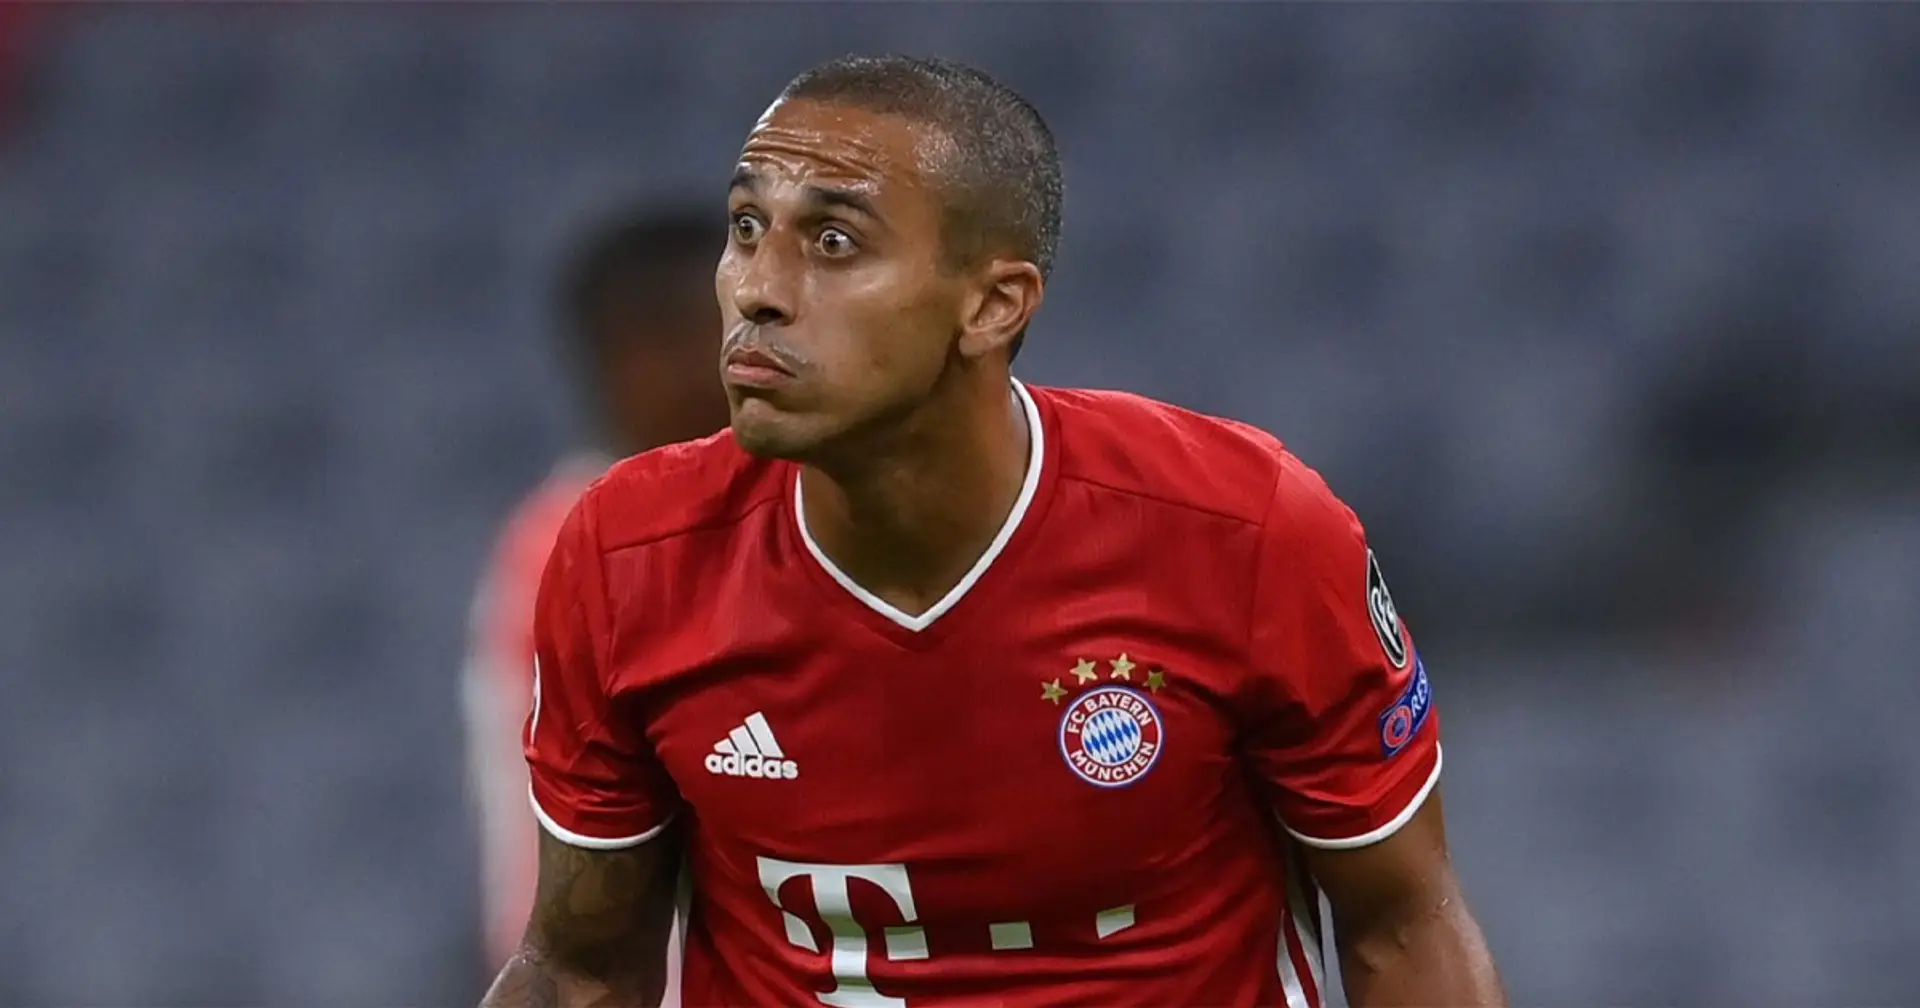 Man United set to miss out on Thiago Alcantara for 2nd time: explained in 45 seconds